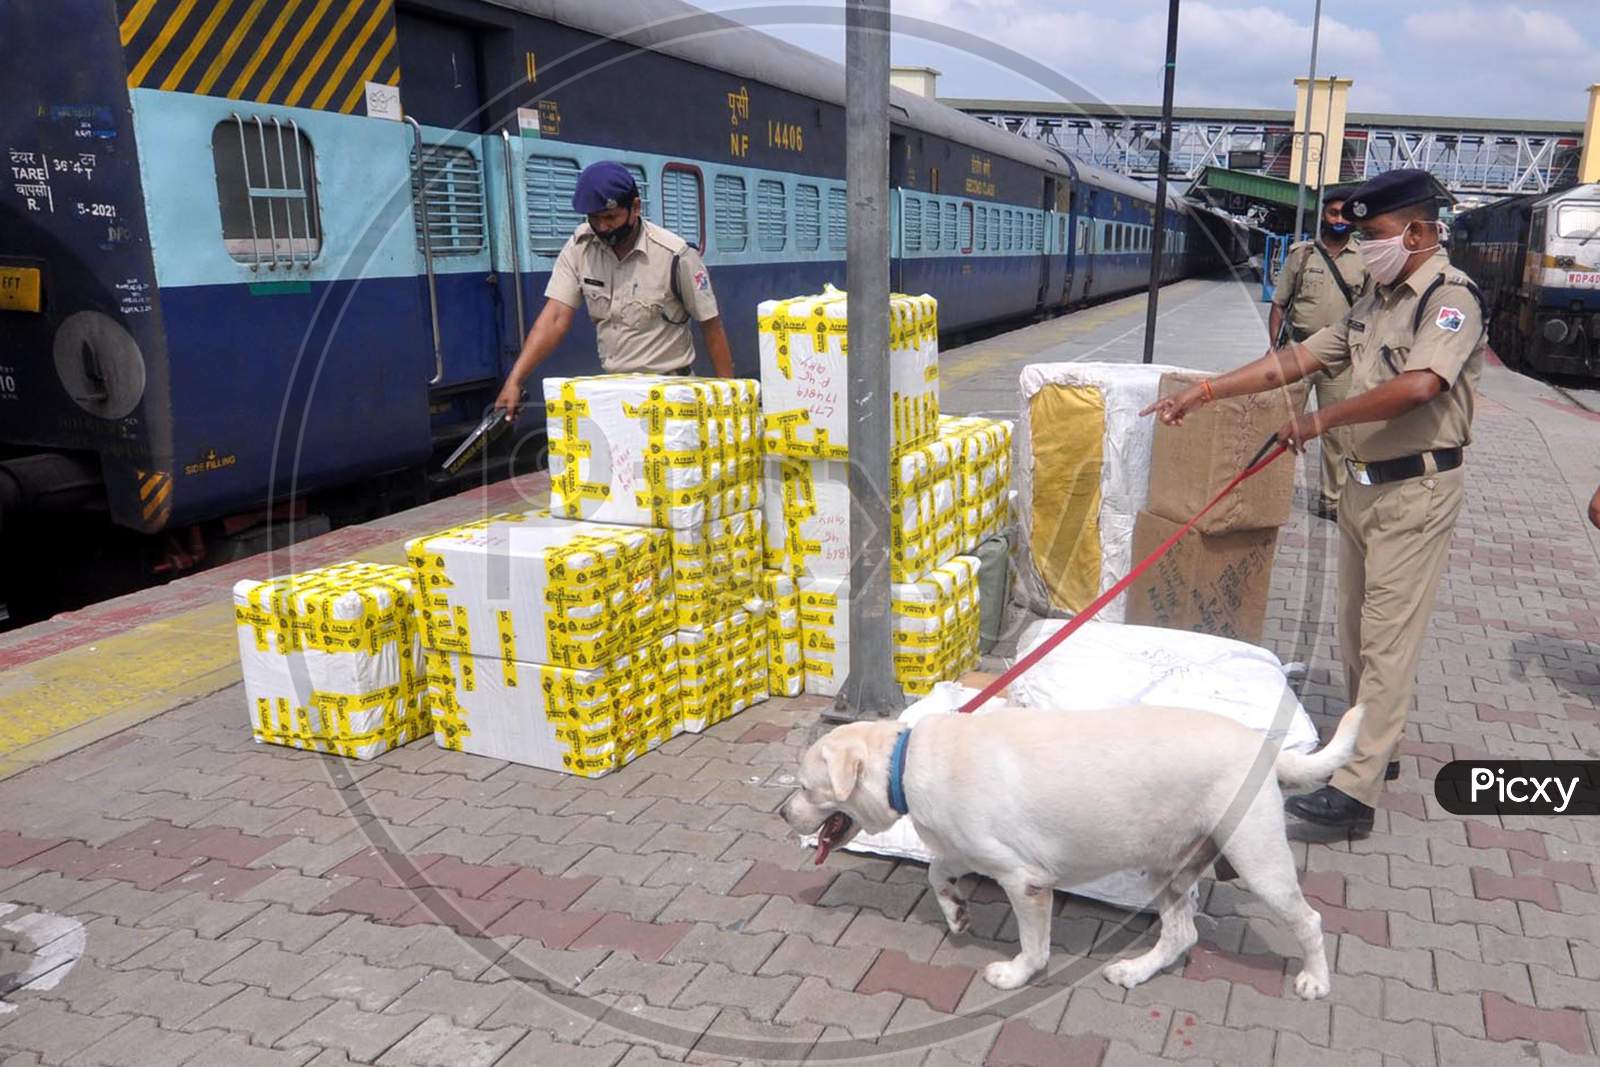 Railway Police Force (Rpf) Personnel Inspect  Platform Along With A Sniffer Dog, Ahead Of The Independence Day Celebrations, In Guwahati On Monday, Aug 10, 2020.